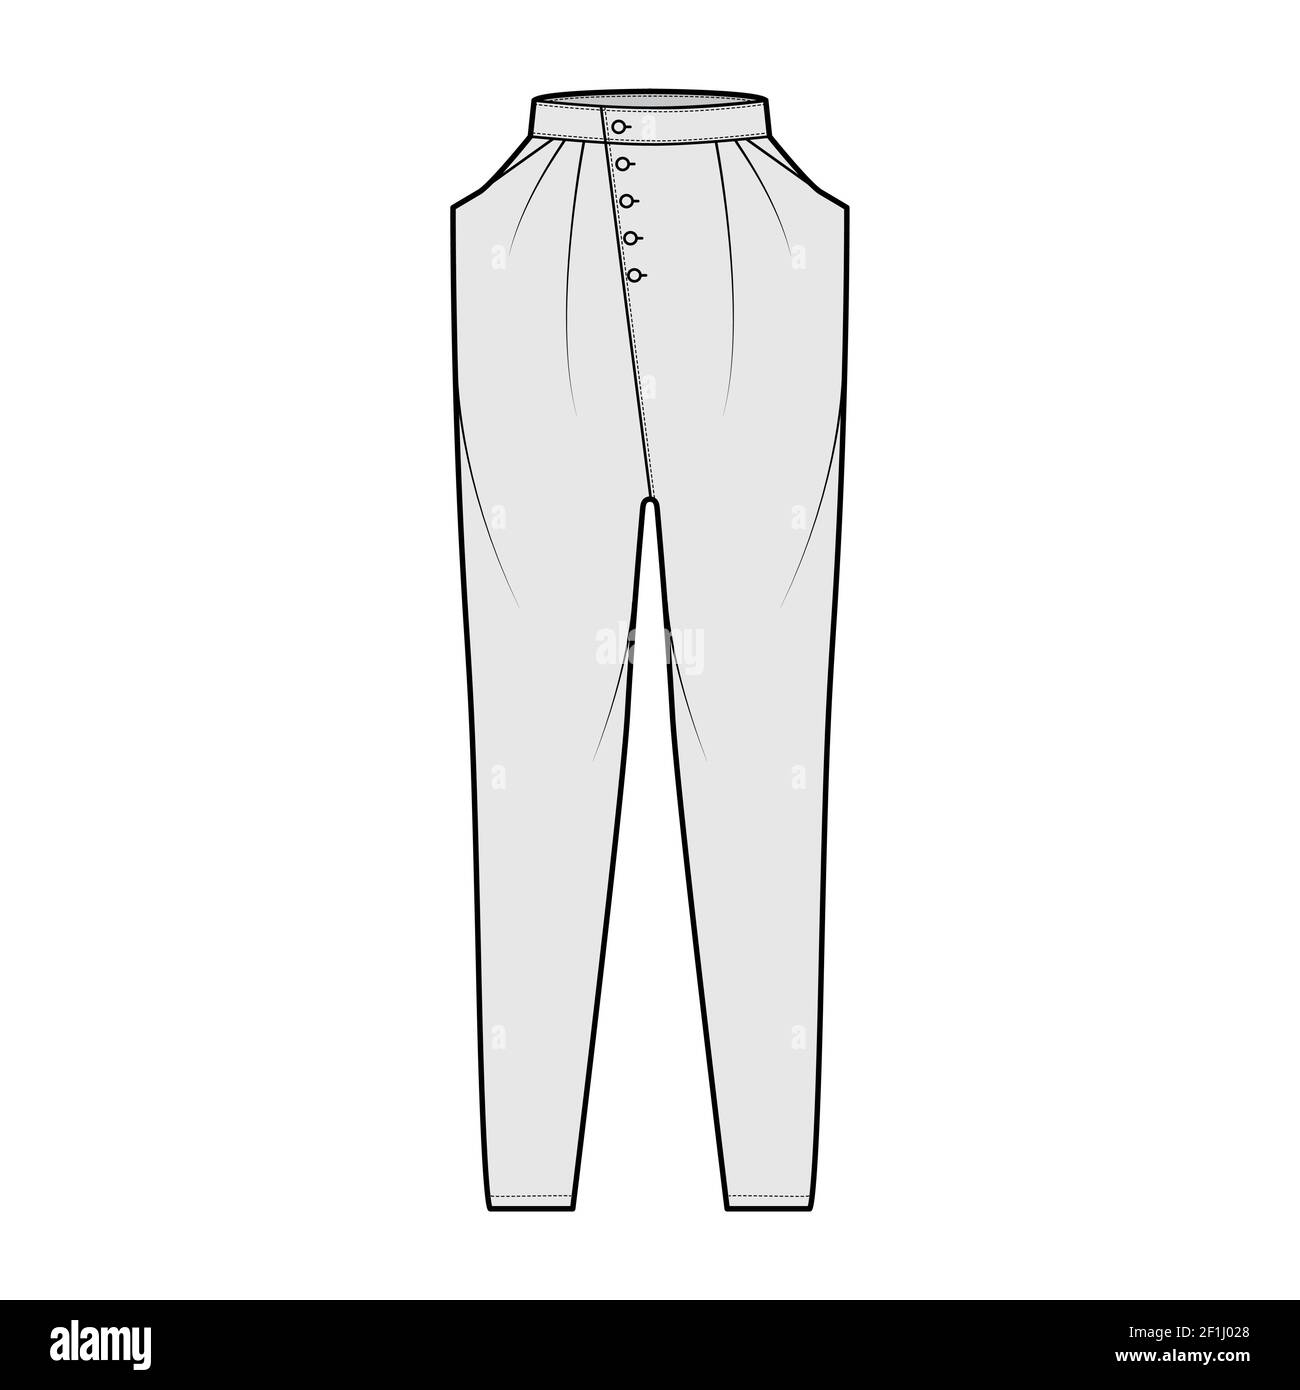 Tapered Baggy pants technical fashion illustration with normal waist, high rise, slash pockets, draping front, full lengths. Flat bottom apparel template grey color style. Women, men unisex CAD mockup Stock Vector